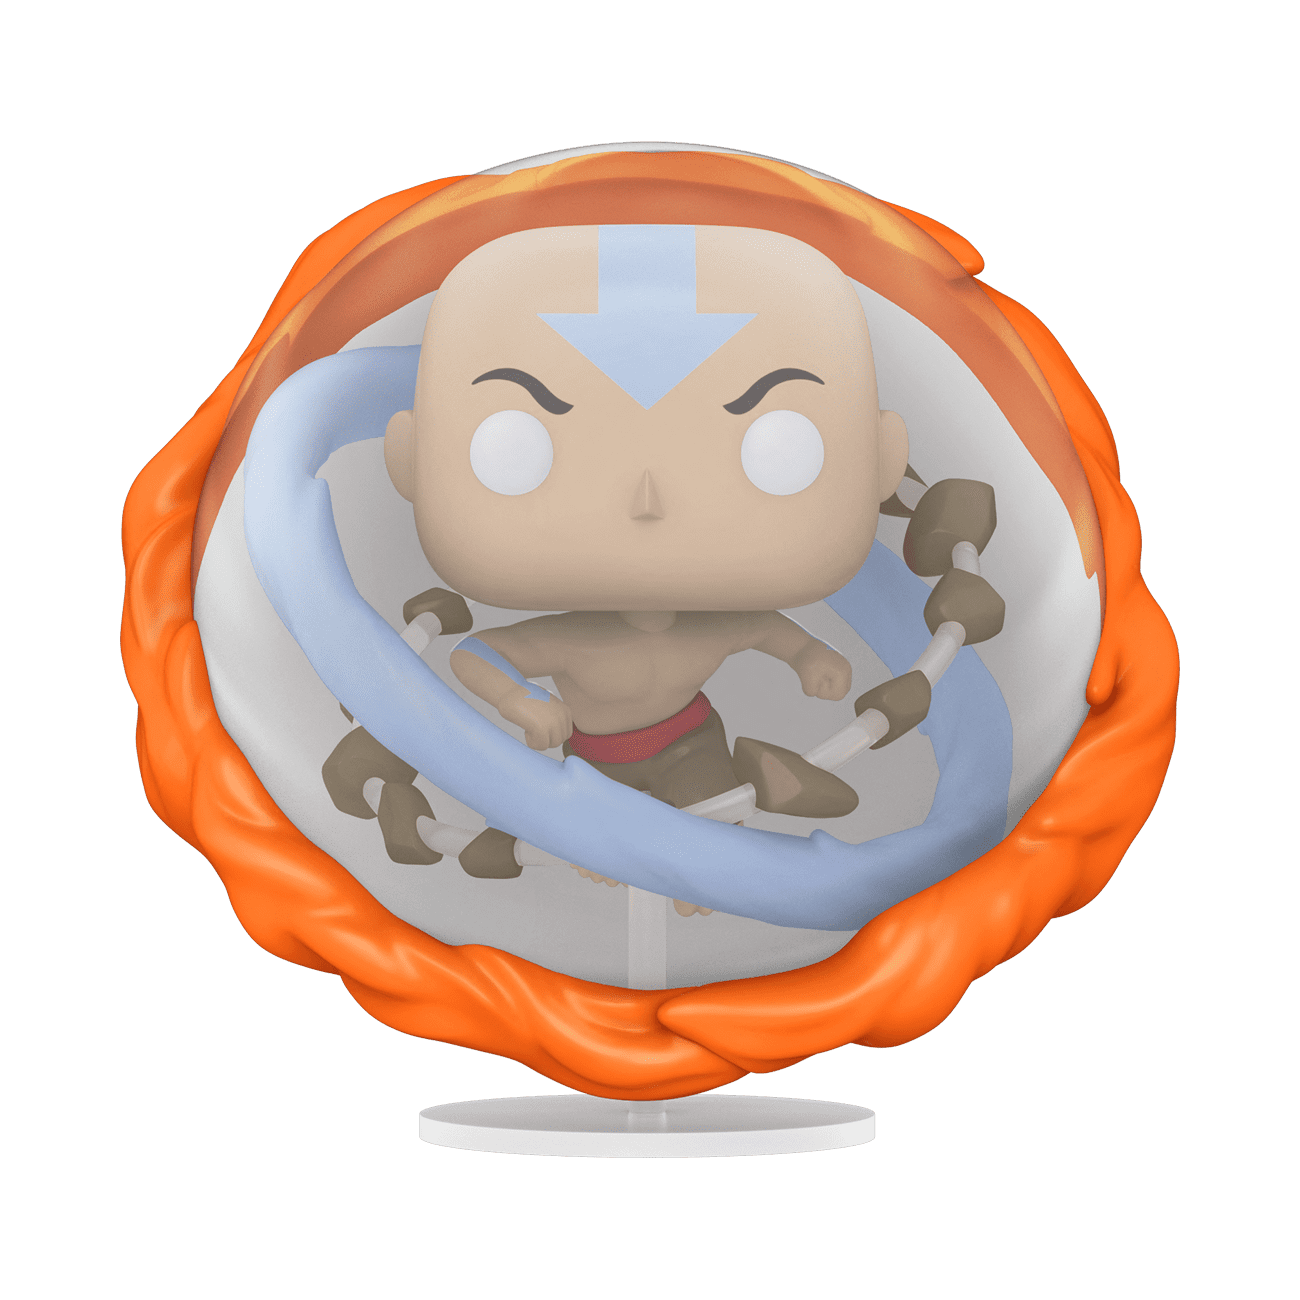 Avatar the Last Airbender Funko Pop PreOrders Are Live